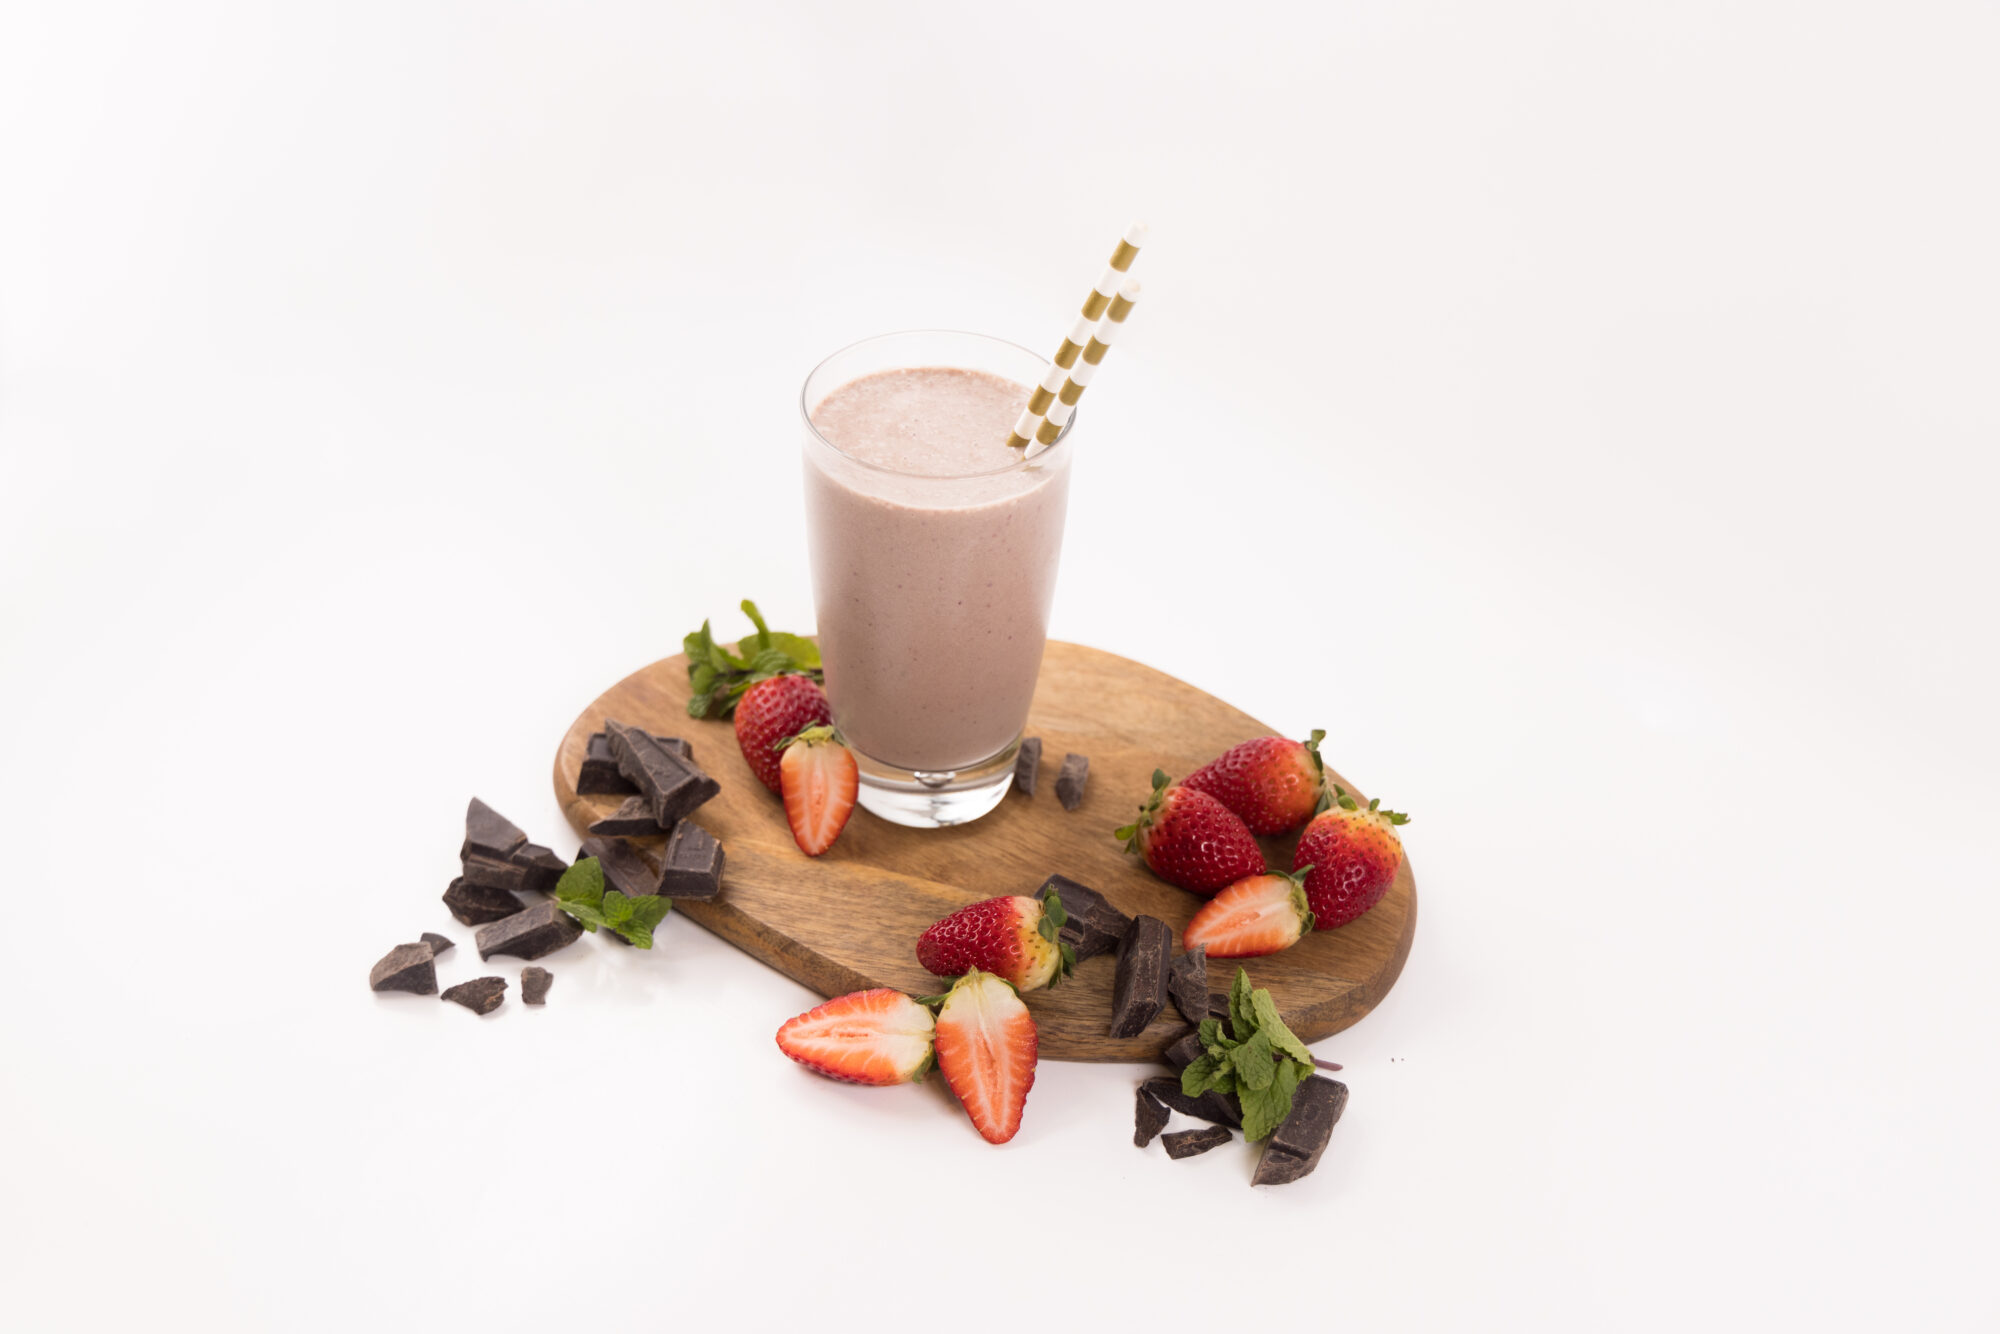 Tall glass filled with a Strawberry Mint Smoothie. Surrounded by strawberries and chocolate pieces.